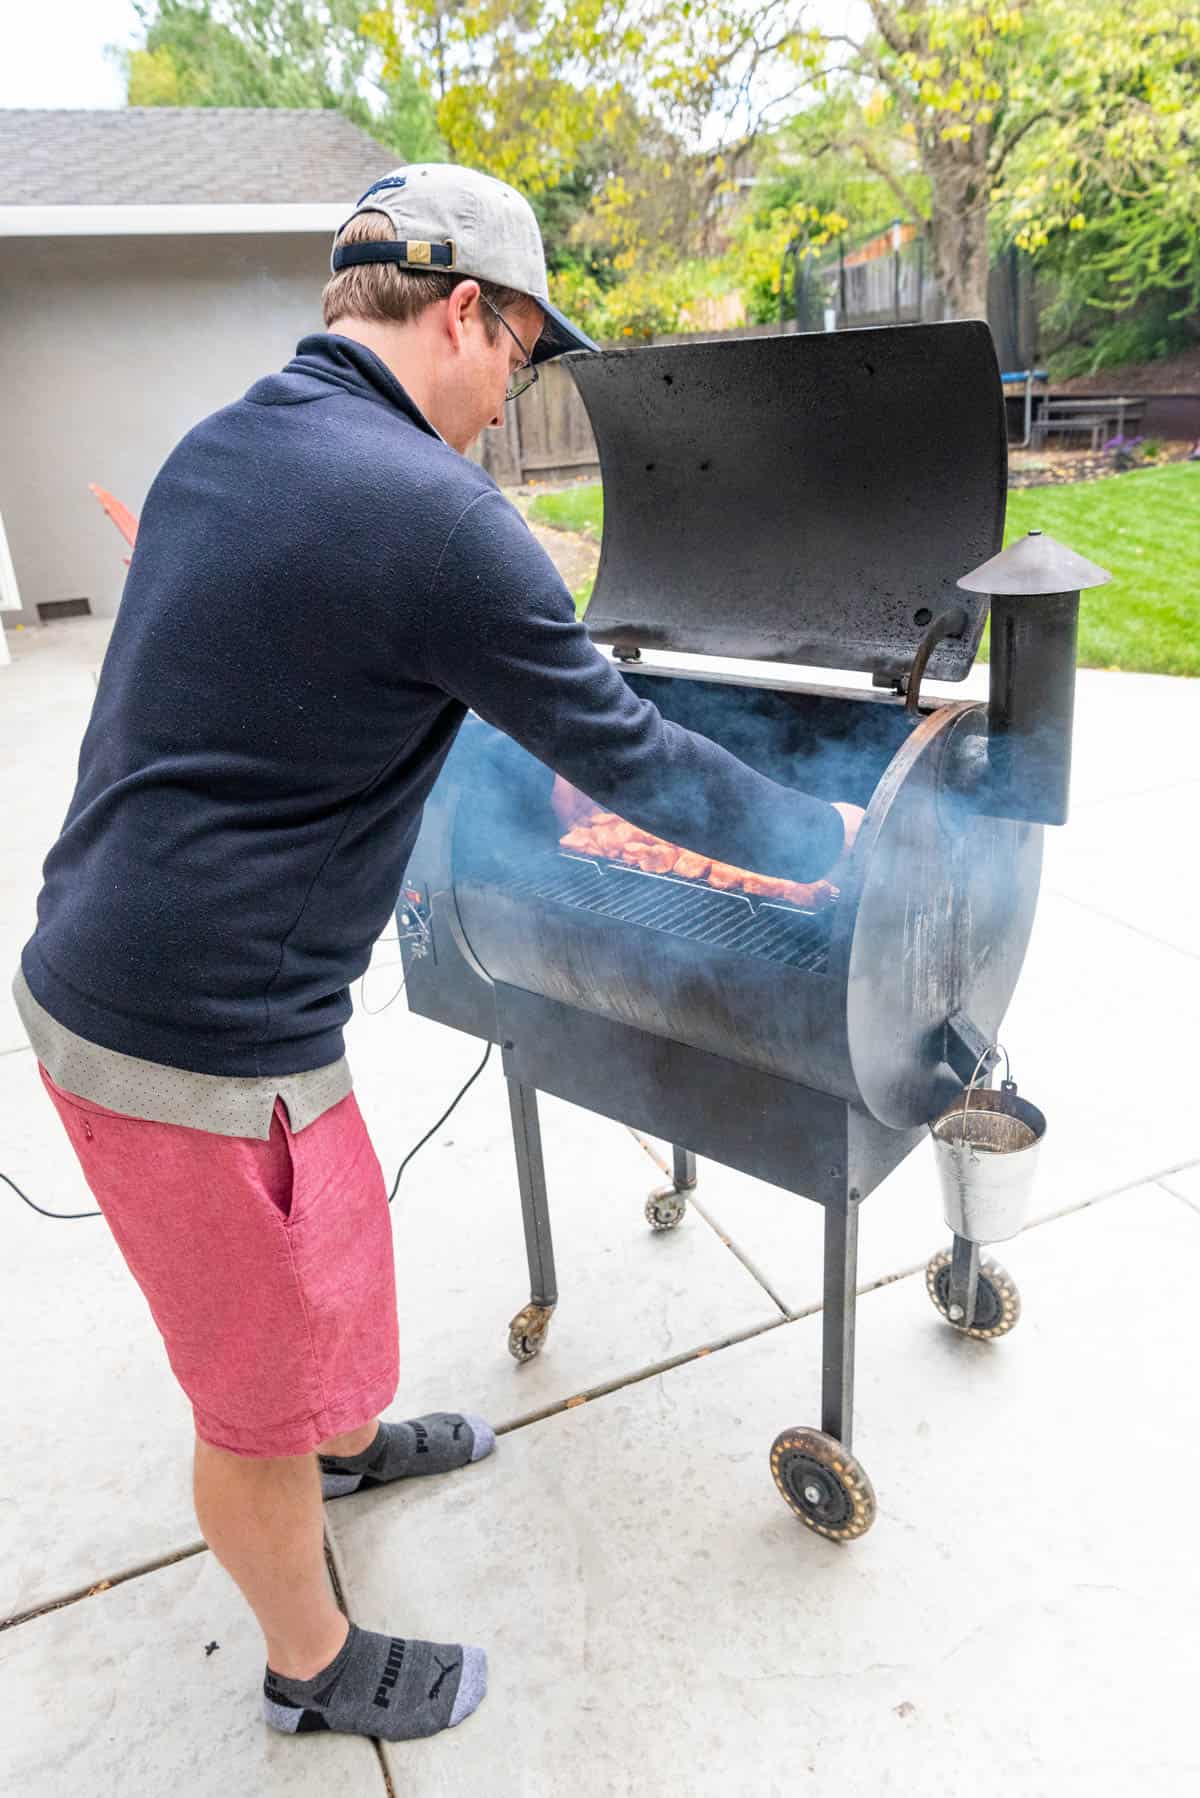 An image of a man putting pork belly on a smoker to make burnt ends.